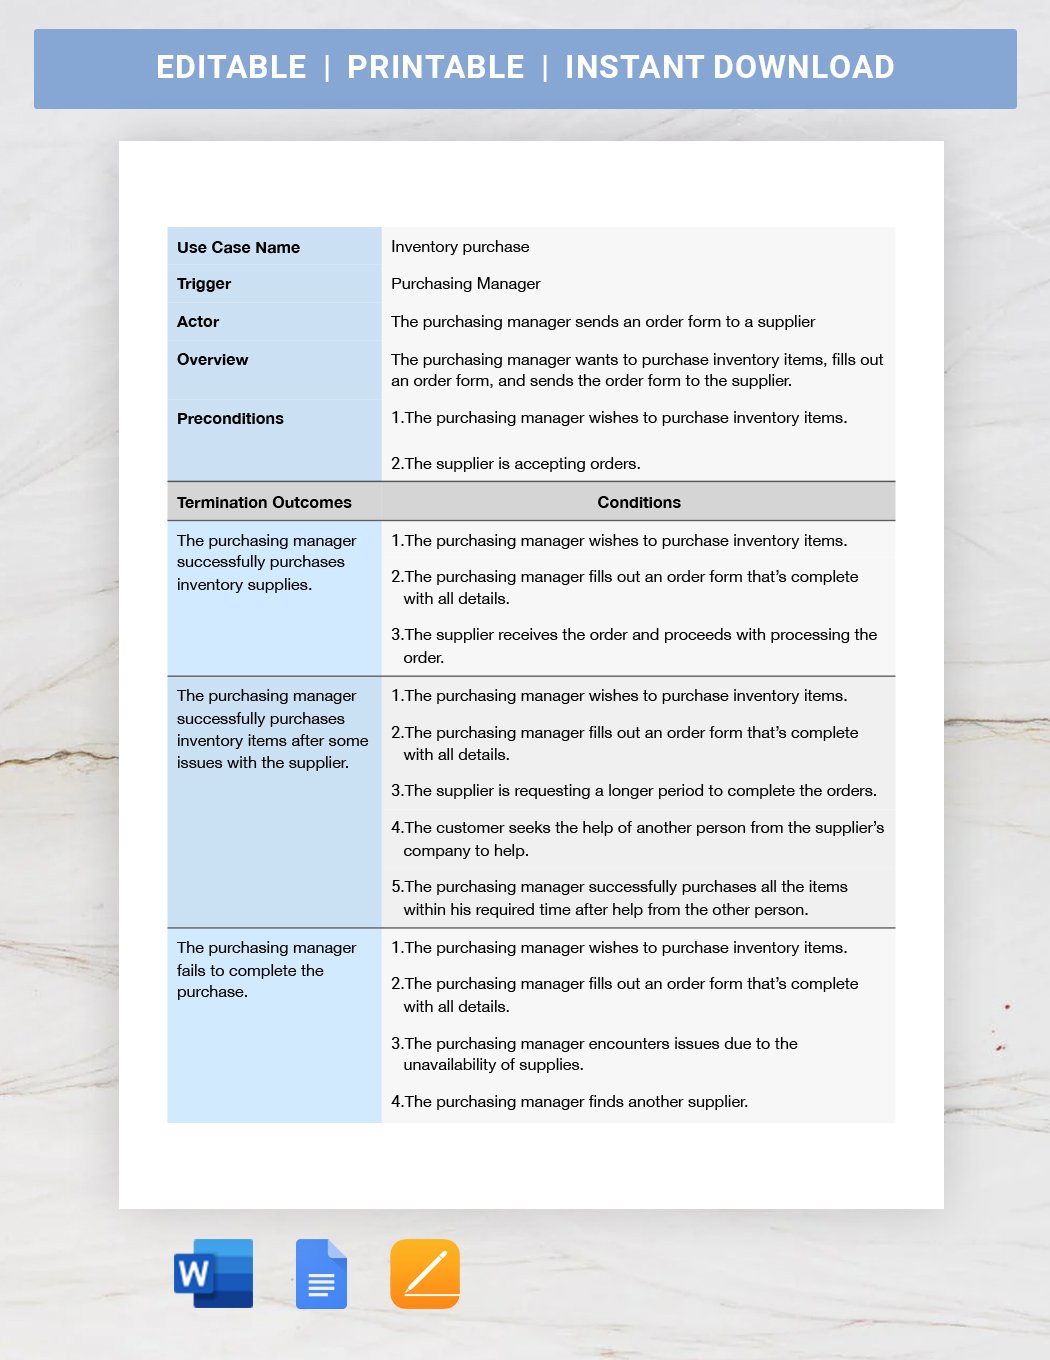 FREE Use Case Template Download in Word, Google Docs, Apple Pages